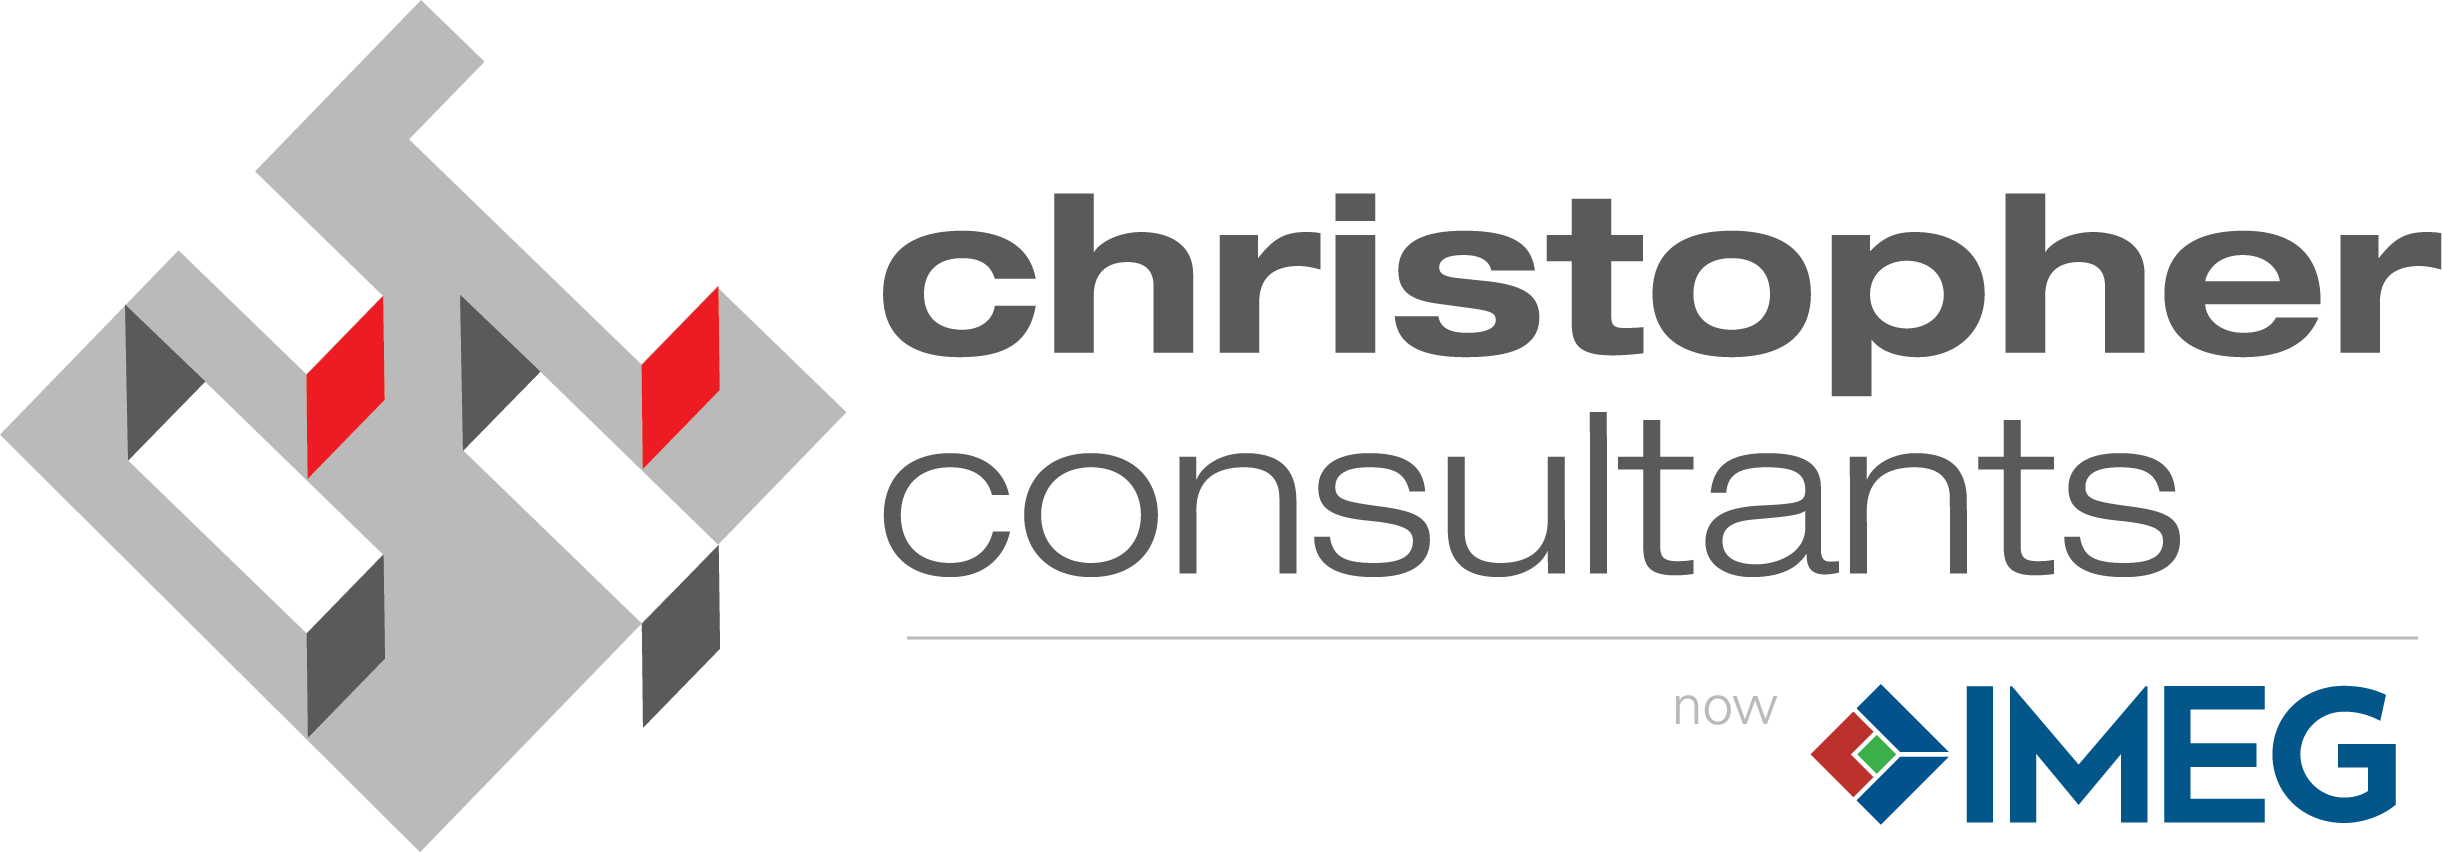 Christopher Consultants